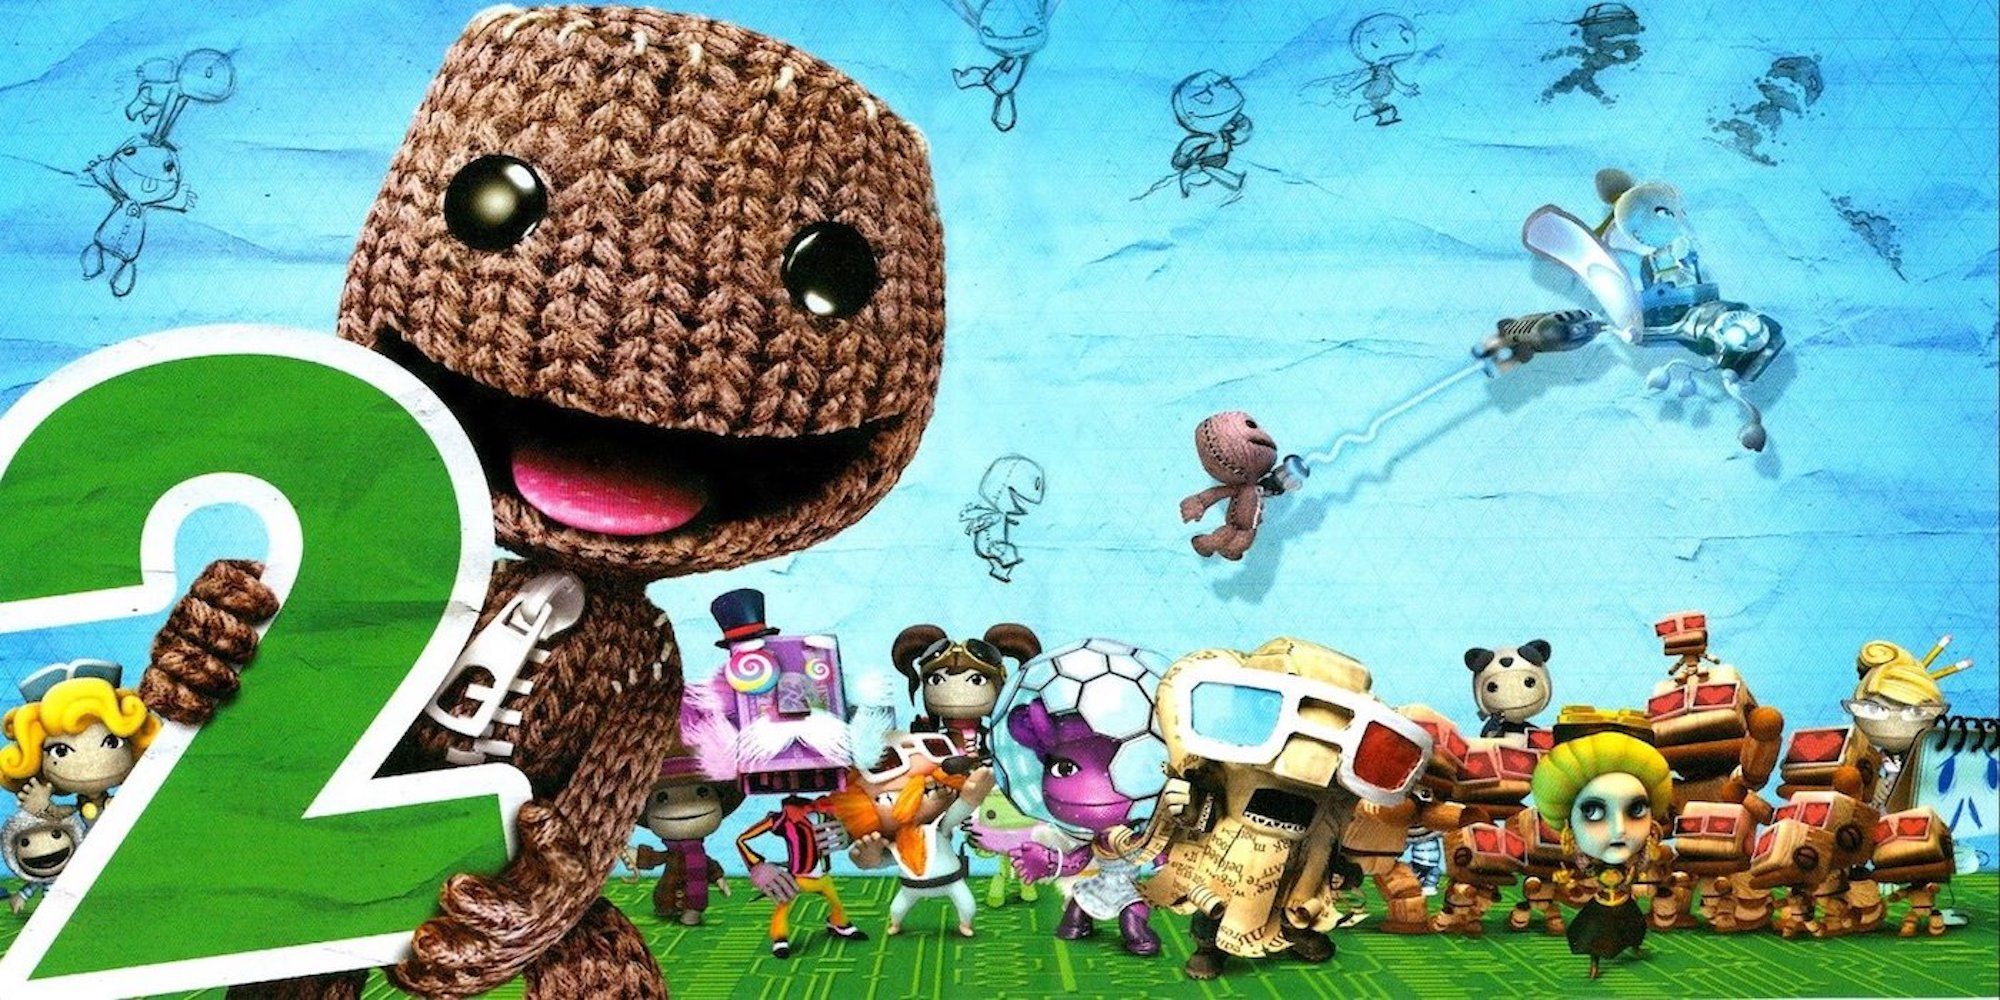 Promo art featuring characters in LittleBigPlanet 2